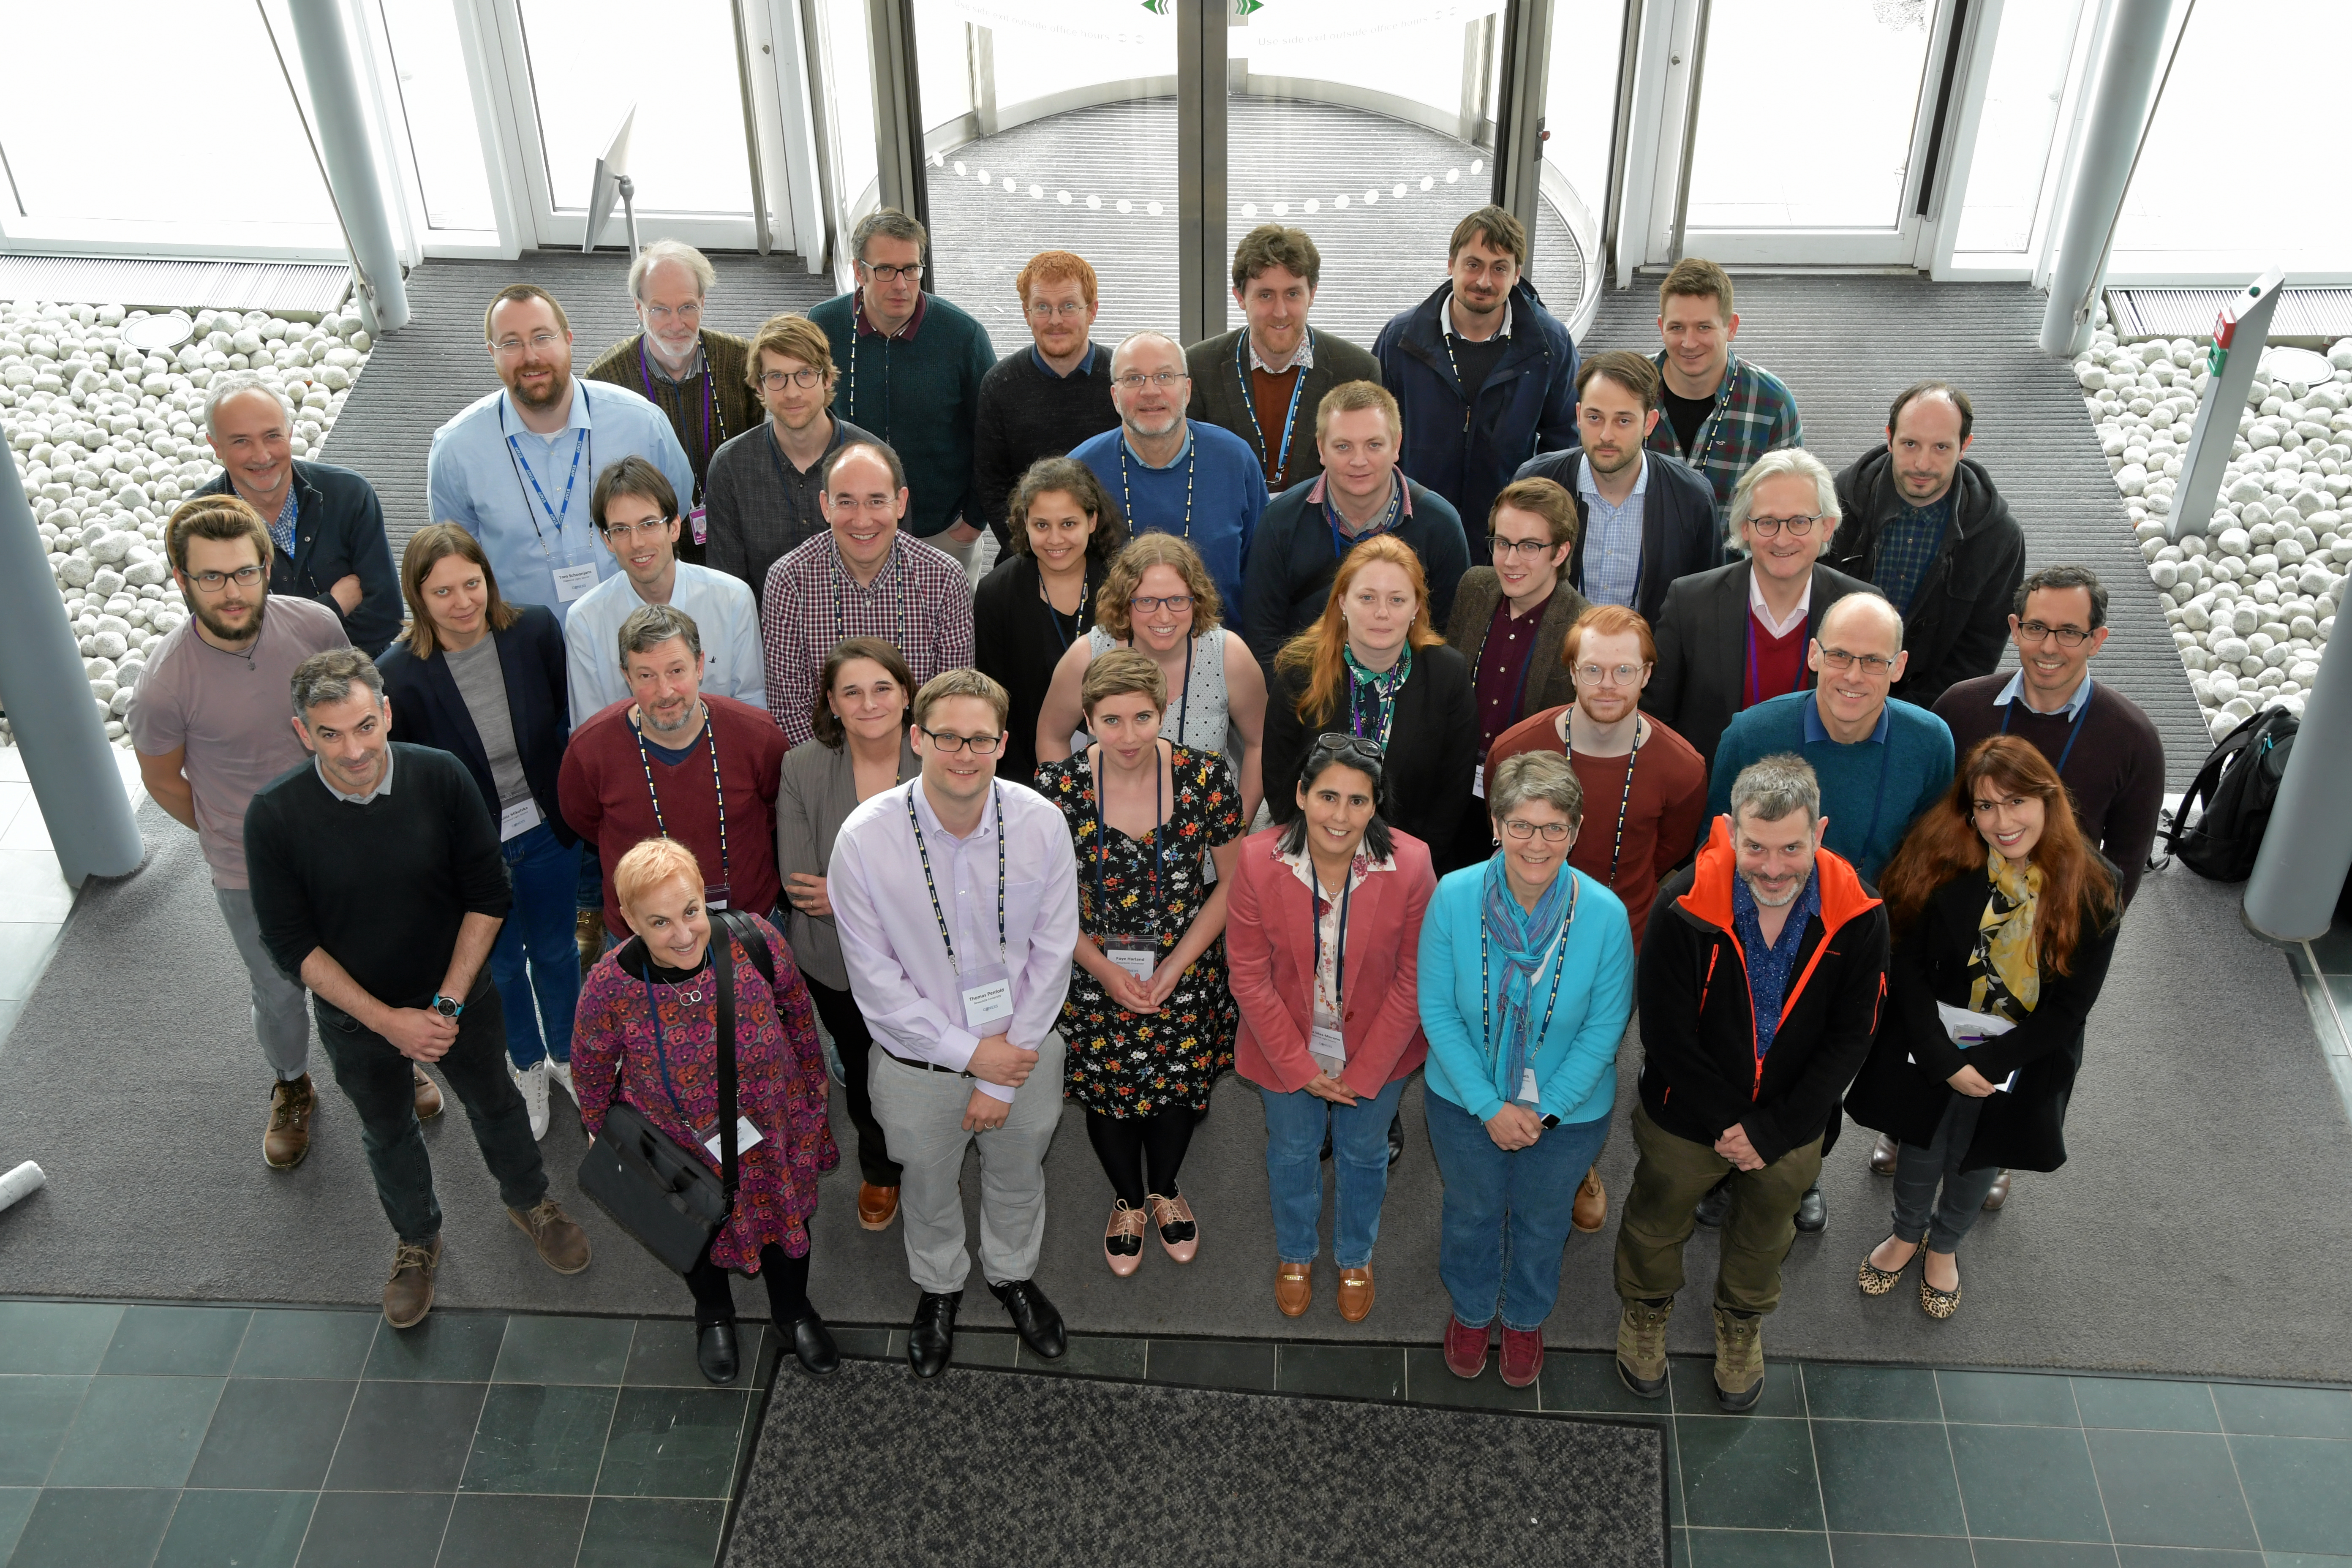 Held in May 2019, the CONEXS network kick-off meeting at Diamond set the stage for successful ongoing collaboration. Many thanks to all who attended.